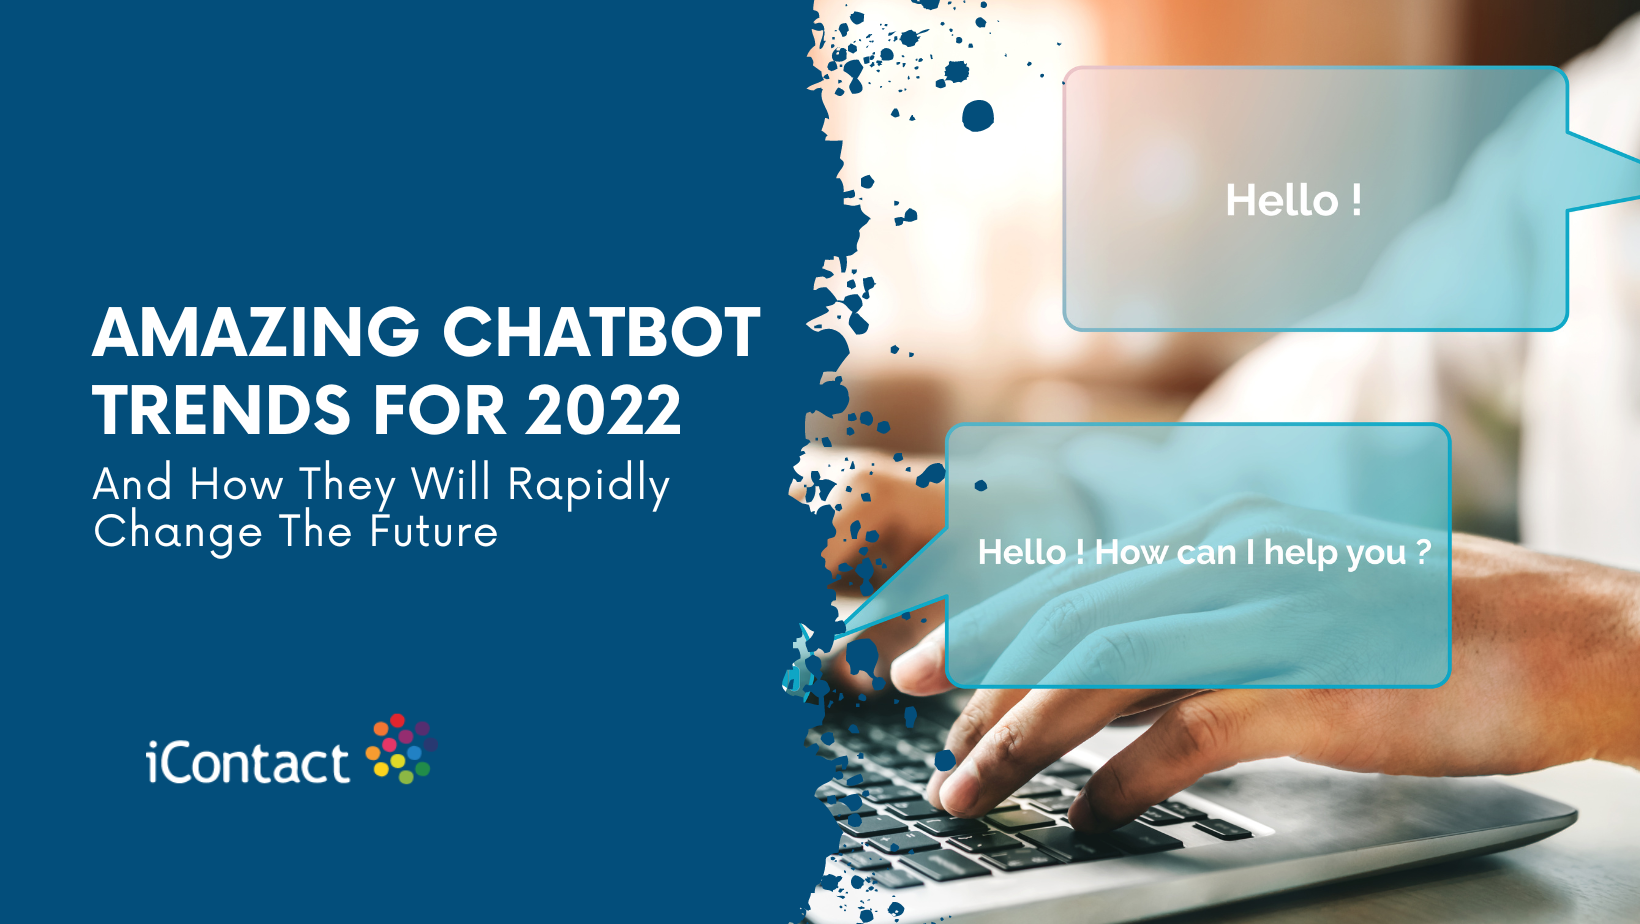 amazing chatbot trends for 2022 with iContact BPO